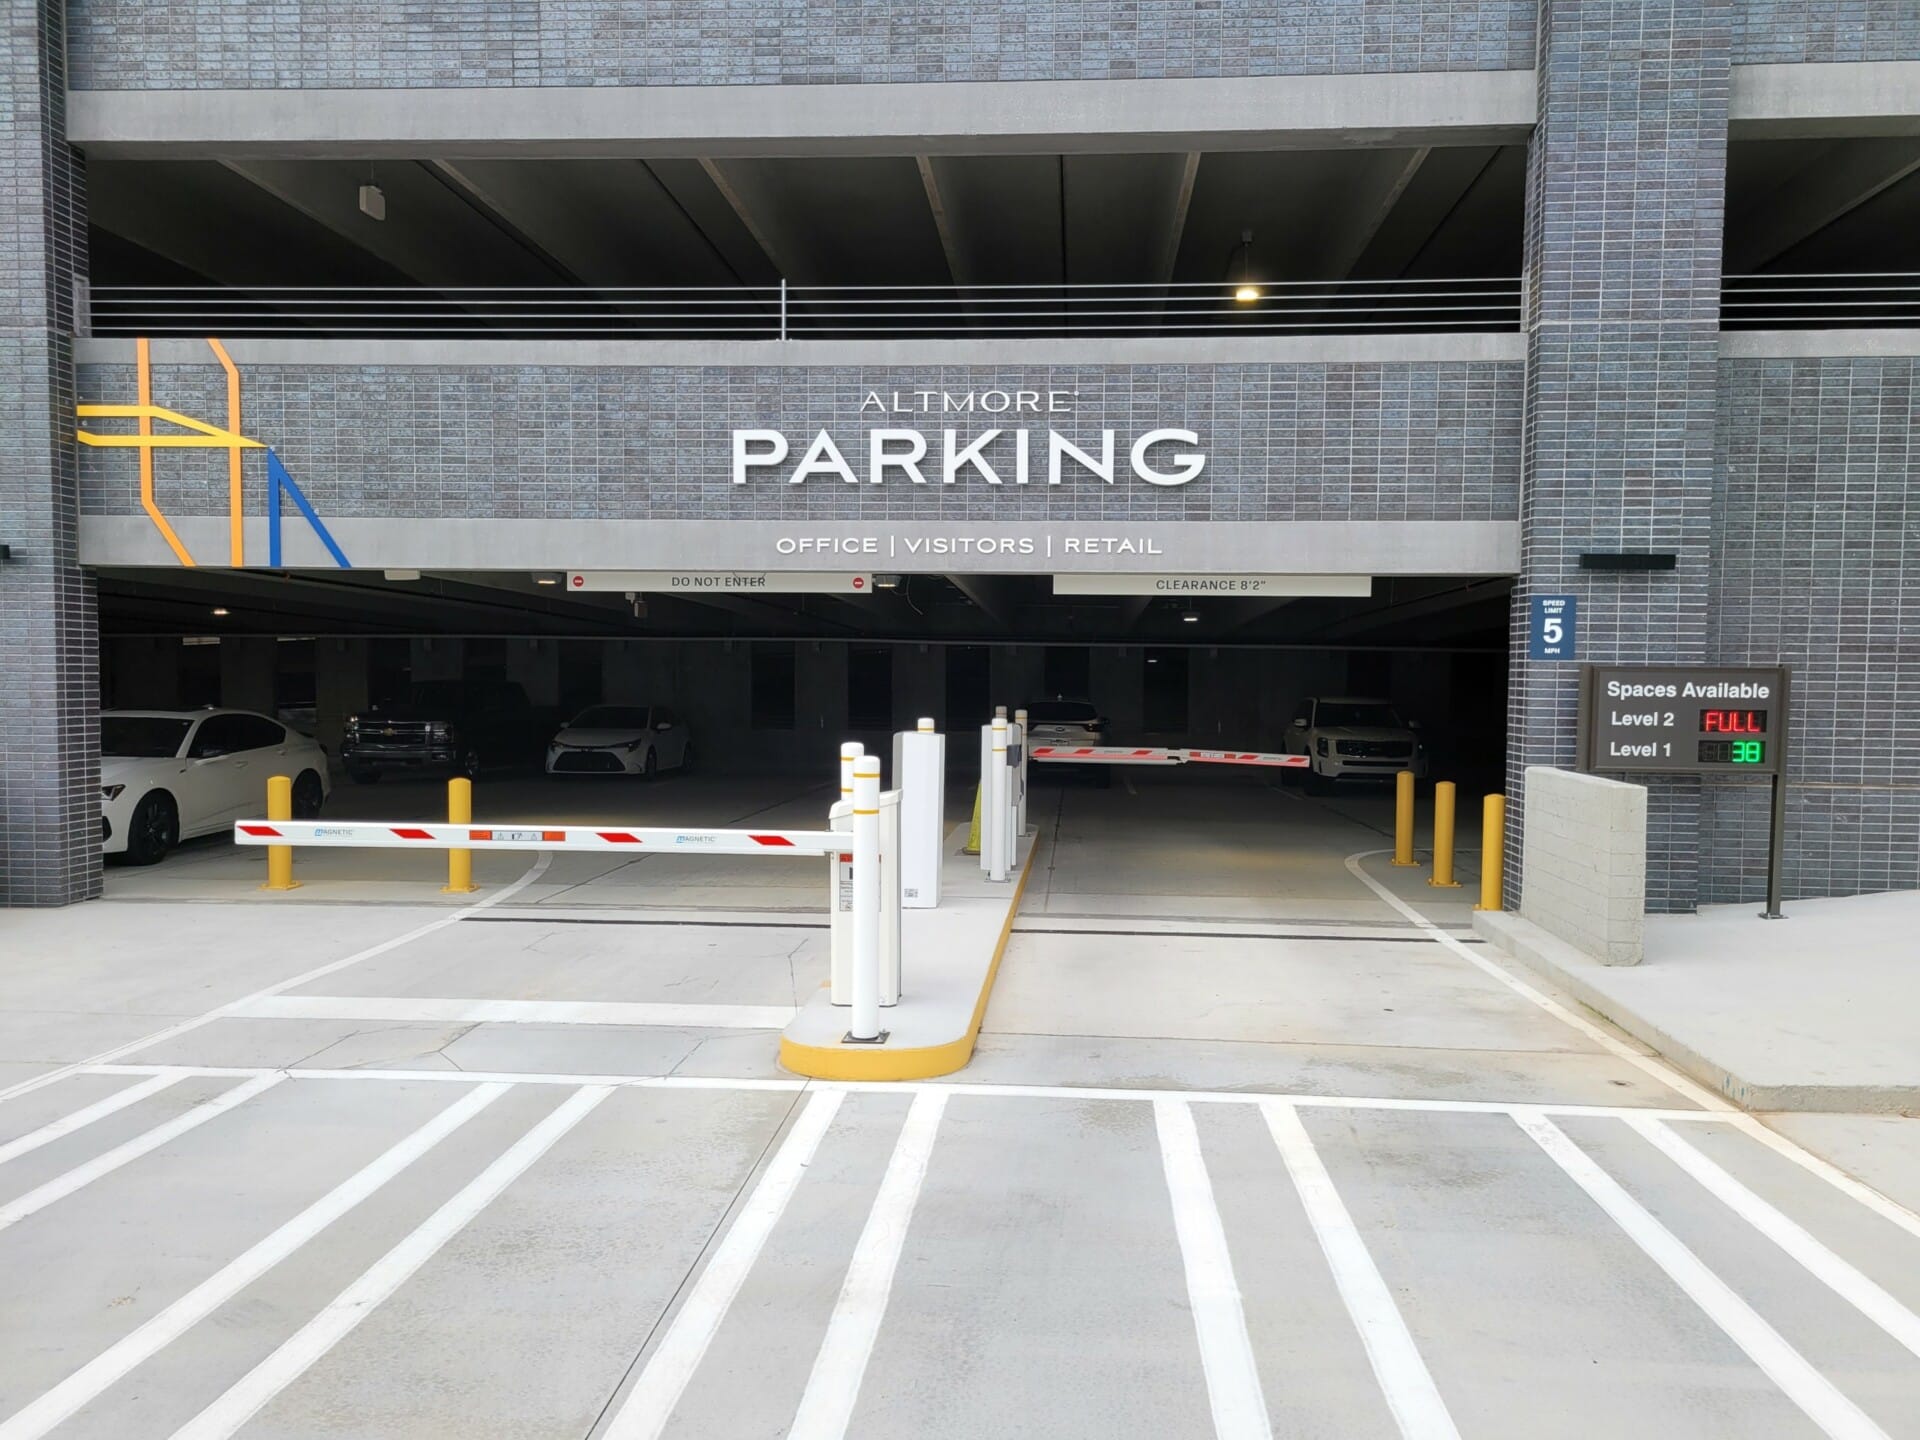 Digital sign shows Full or number of available parking spaces in a secure parking area with parking space tracking.